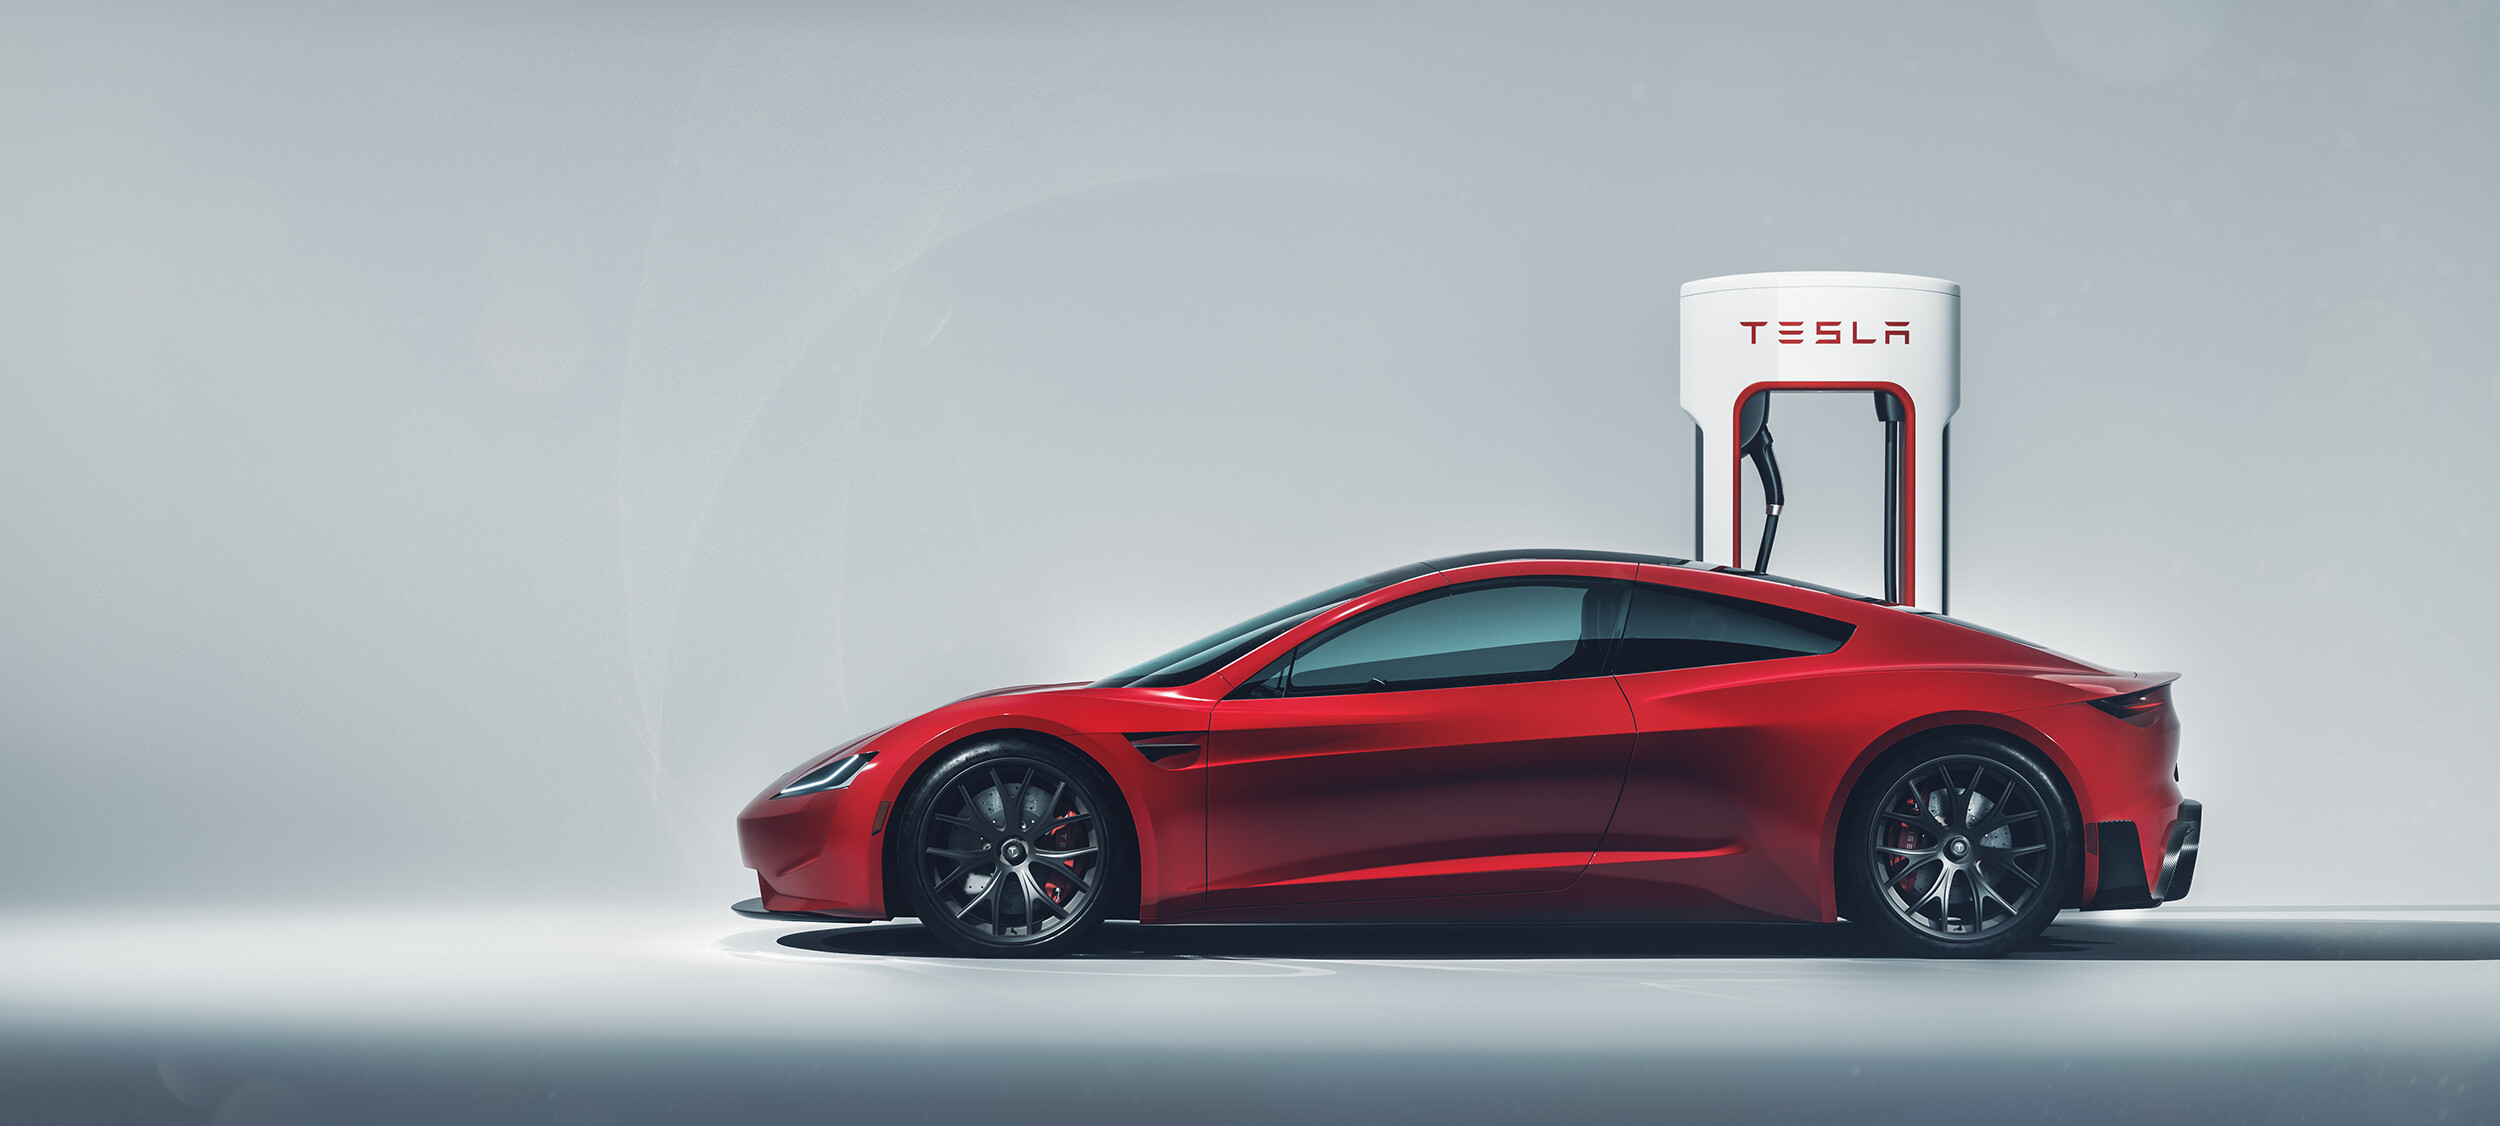 Tesla: Founded in 2003 and named after the 19th-century inventor Nikola Tesla. 2500x1130 Dual Screen Wallpaper.